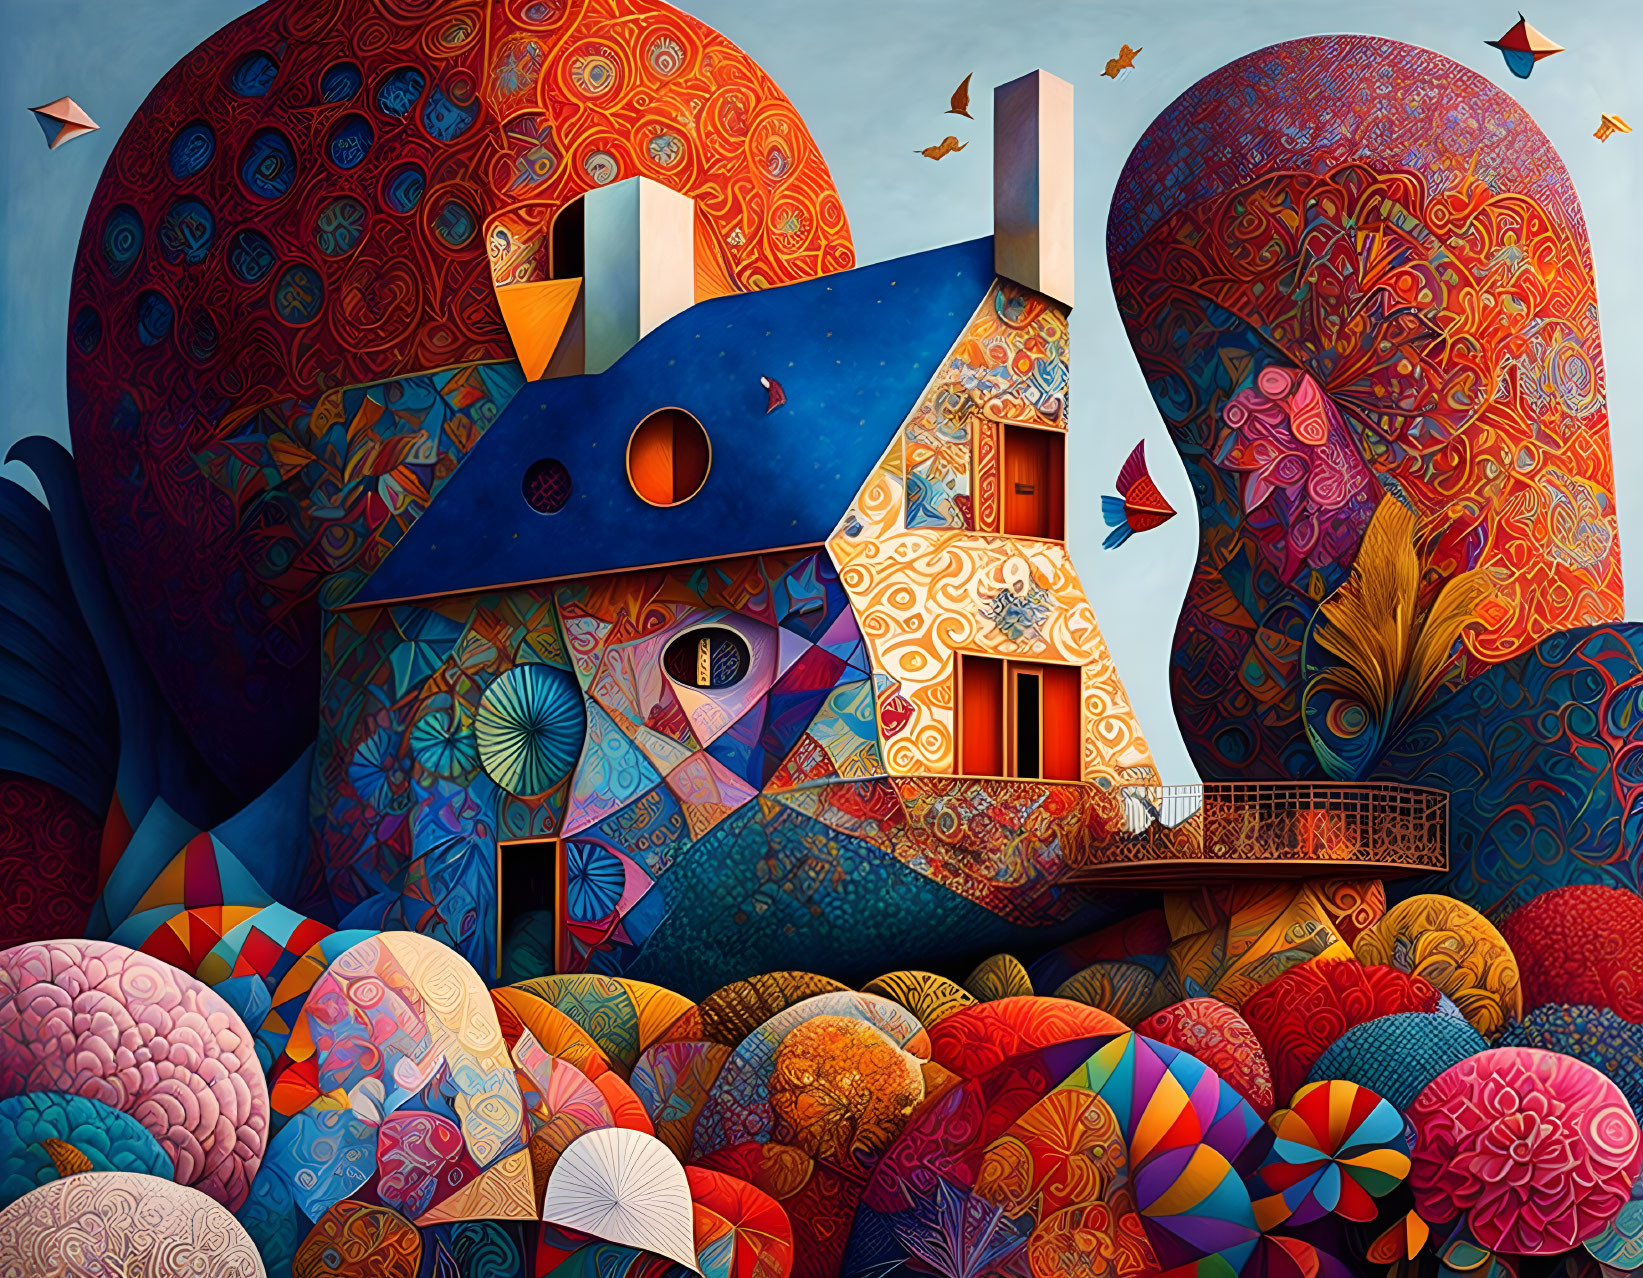 Colorful whimsical house illustration with ornate hills and circular sky